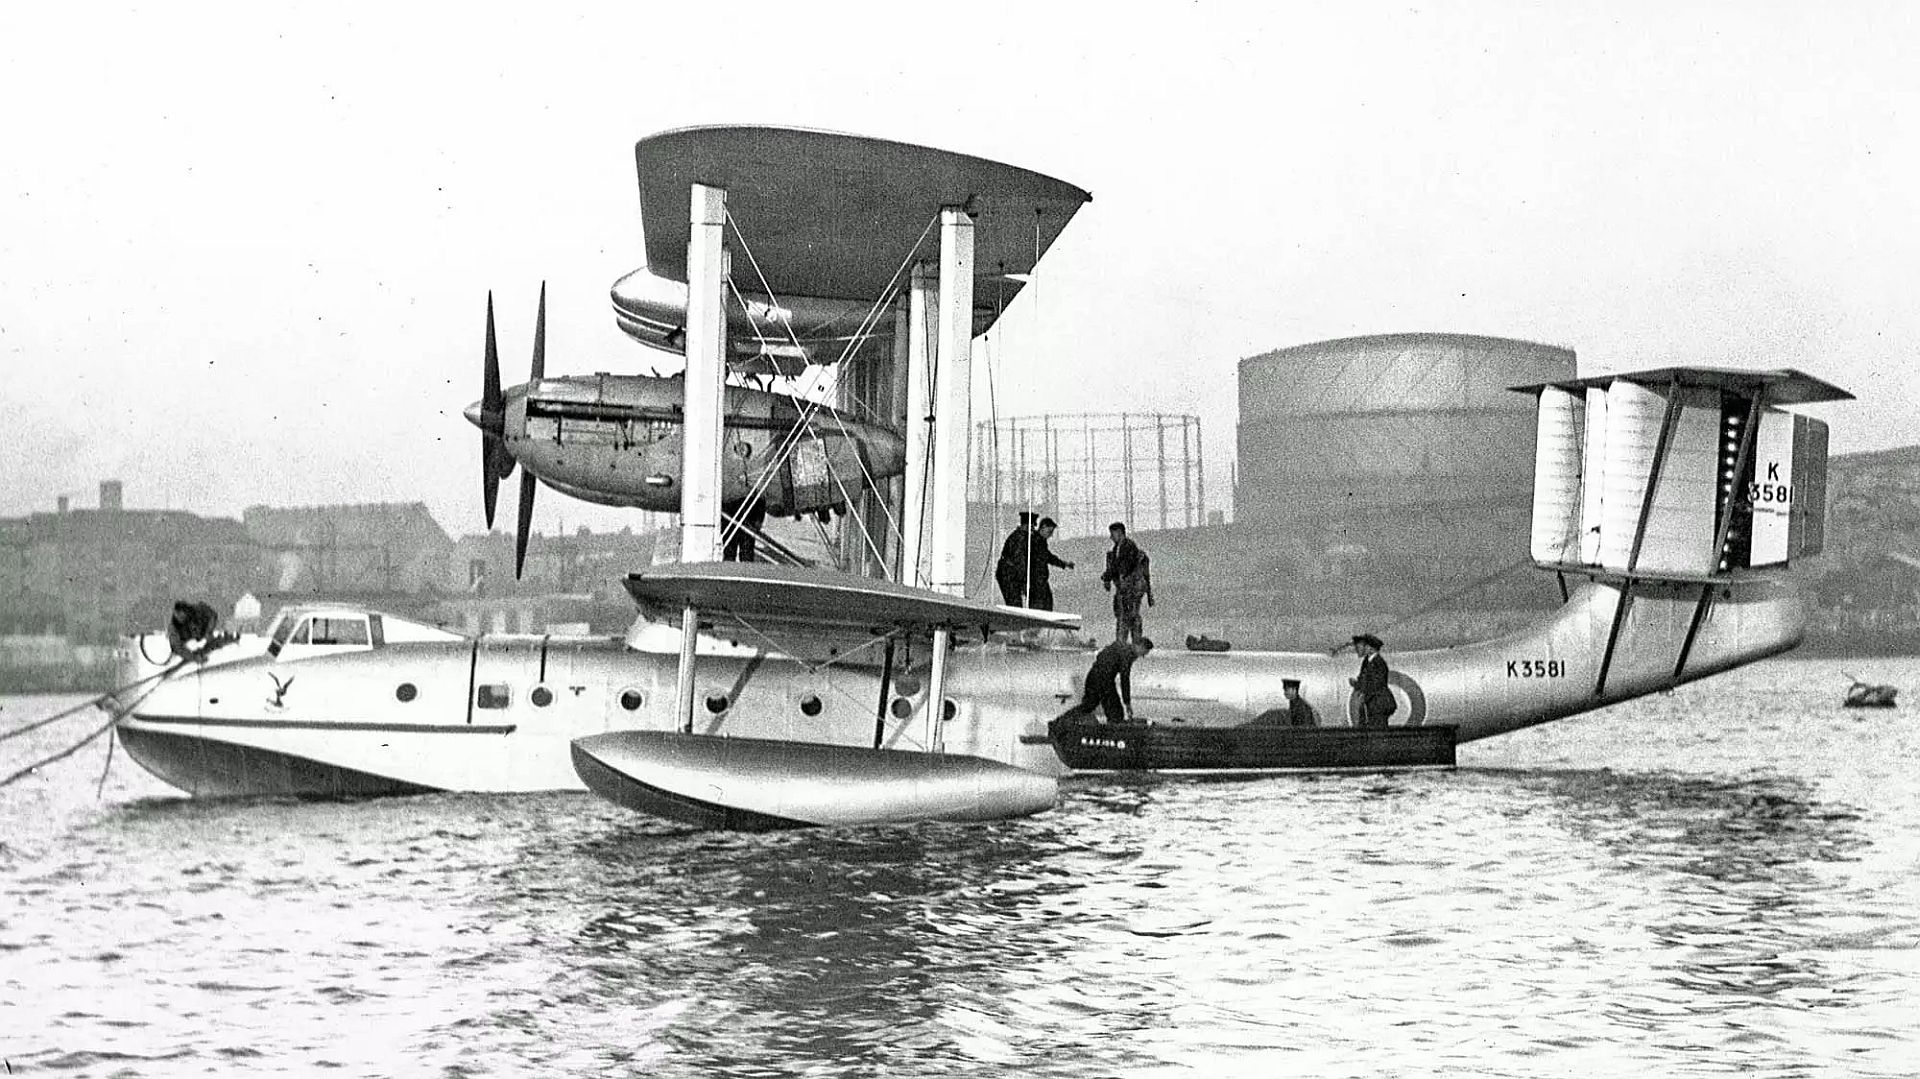 The Second Blackburn Perth K3581 Believed To Be At Its Mount Batten Base At Plymouth